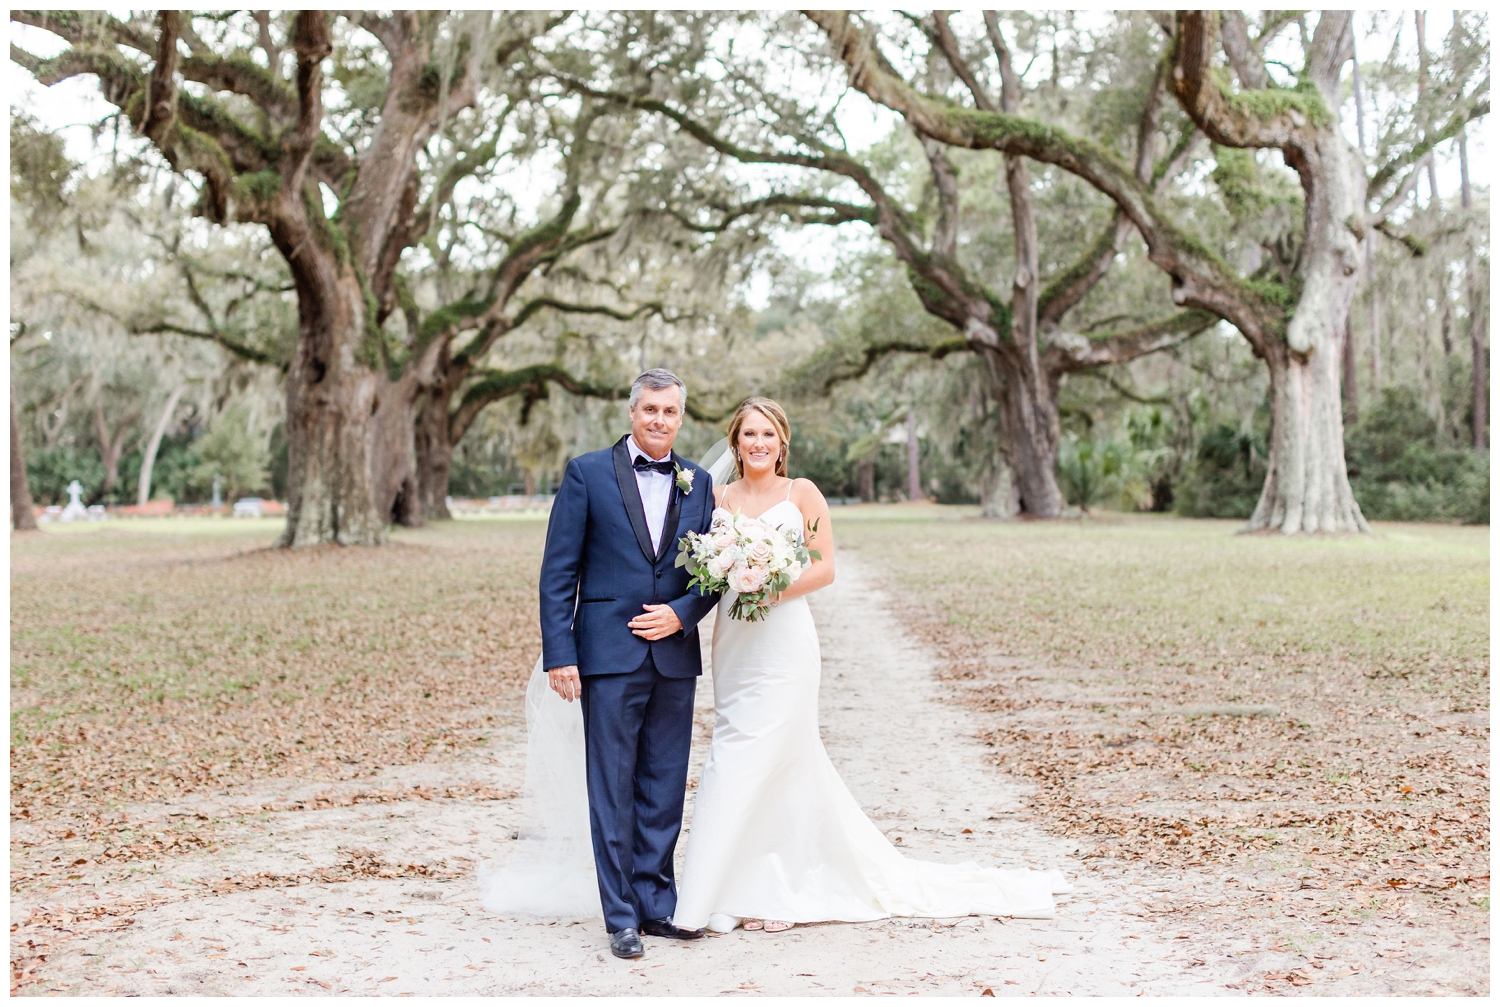 father and bride portrait at at Sea Pines Resort wedding venue